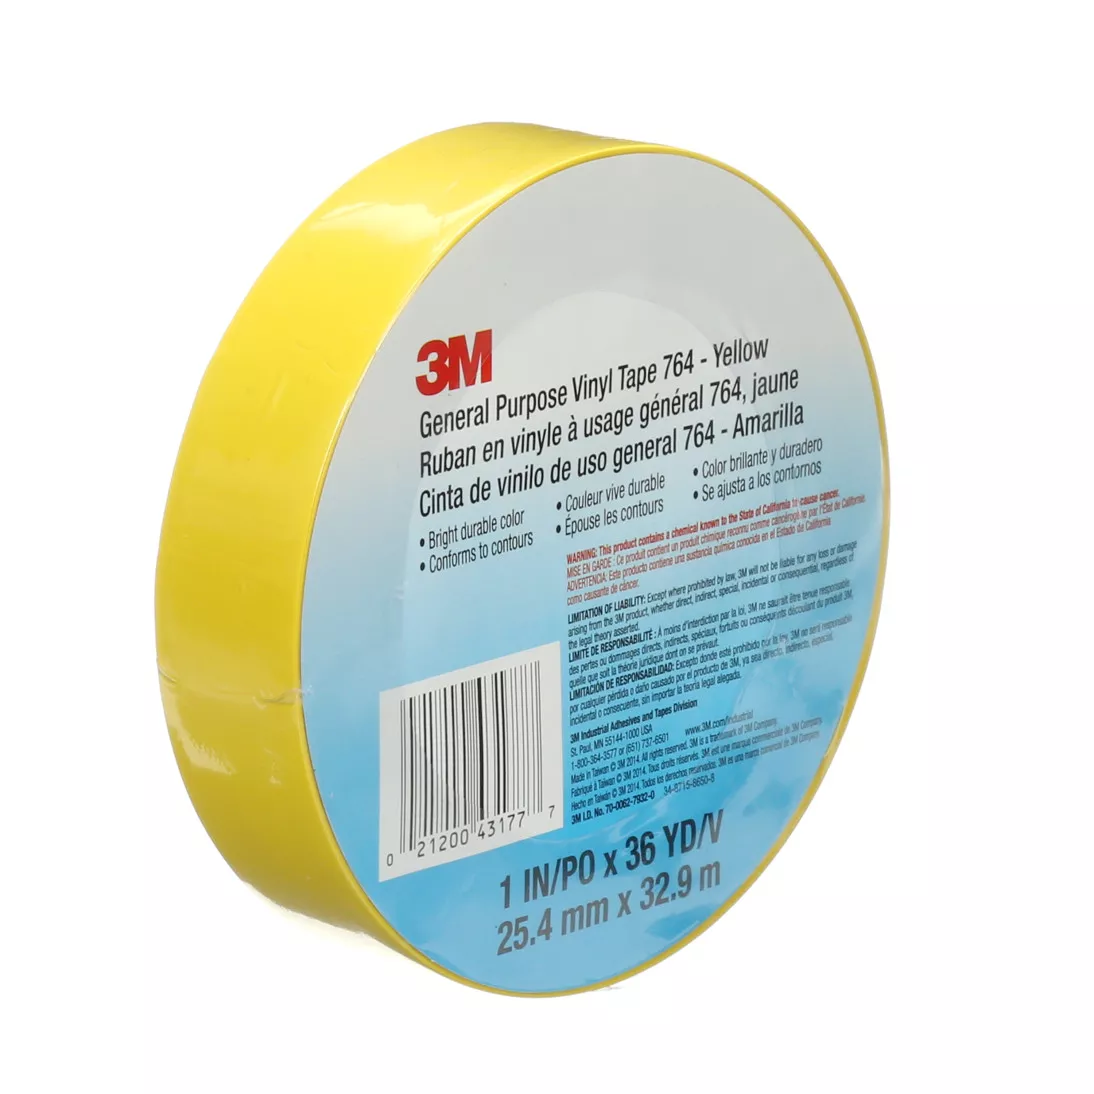 3M™ General Purpose Vinyl Tape 764, Yellow, 1 in x 36 yd, 5 mil, 36 Roll/Case, Individually Wrapped Conveniently Packaged